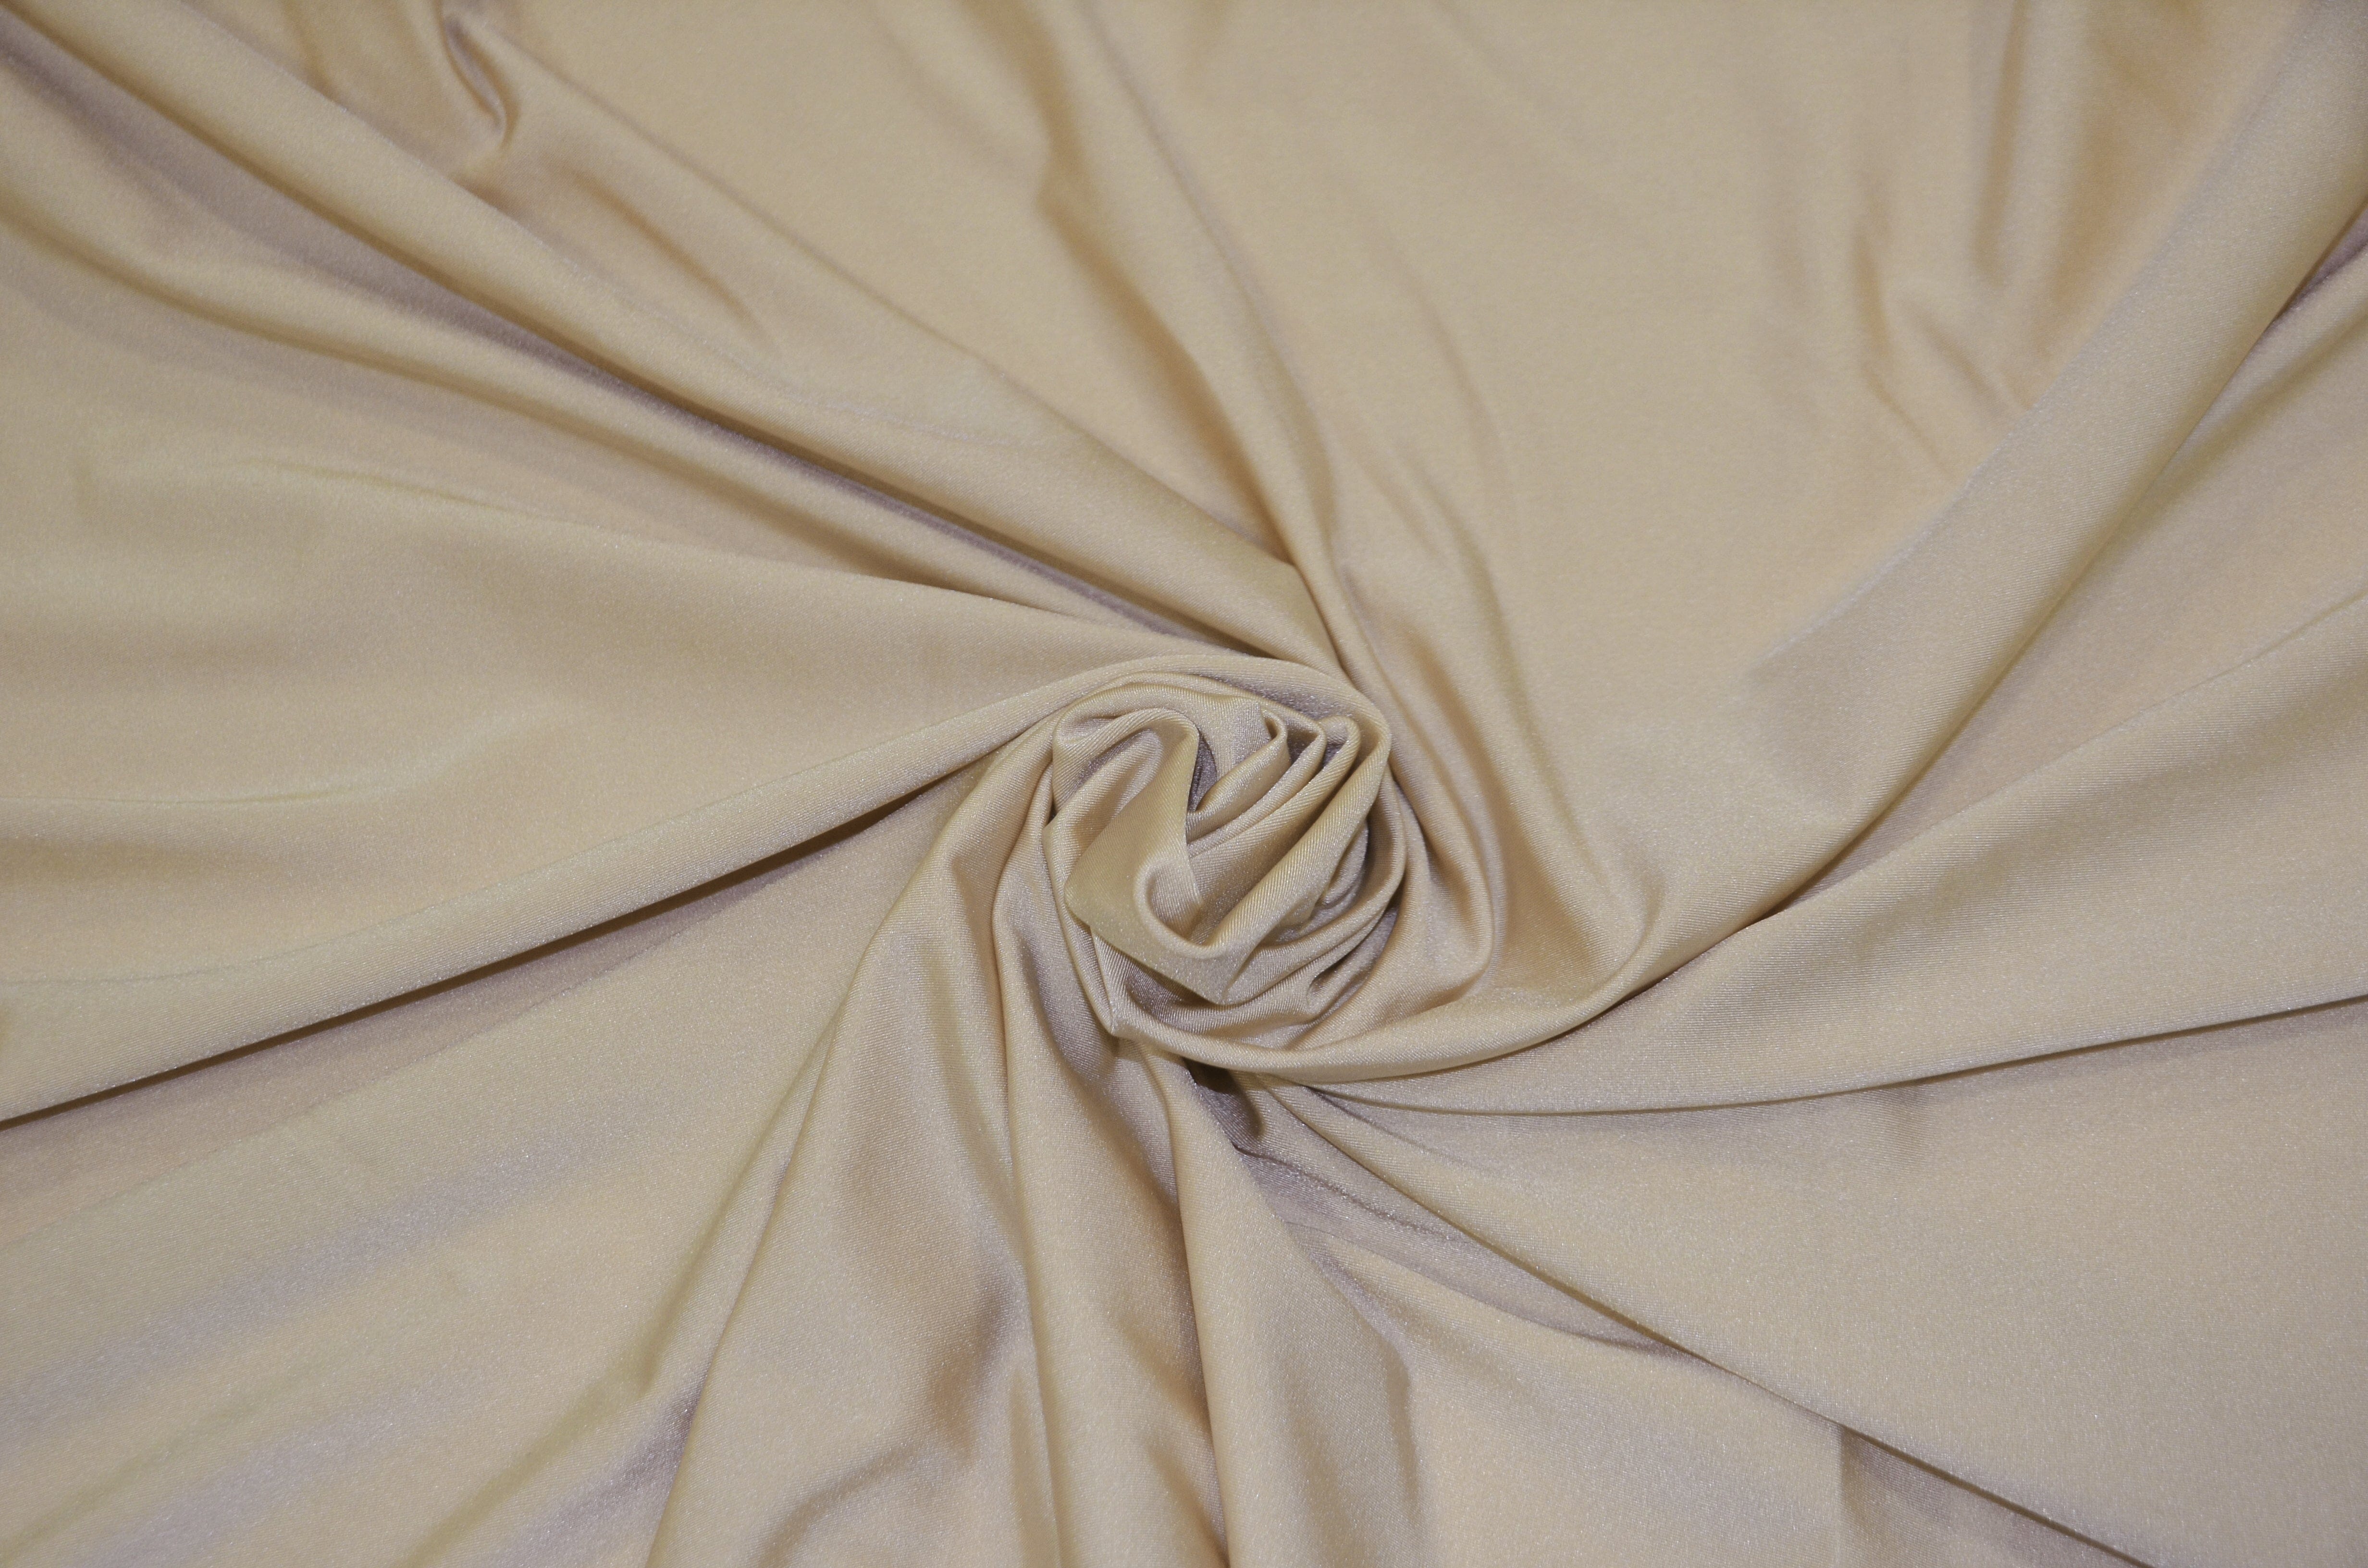 Nylon Spandex 4 Way Stretch Fabric | 60" Width | Great for Swimwear, Dancewear, Waterproof, Tablecloths, Chair Covers | Multiple Colors | Fabric mytextilefabric Yards Champagne 